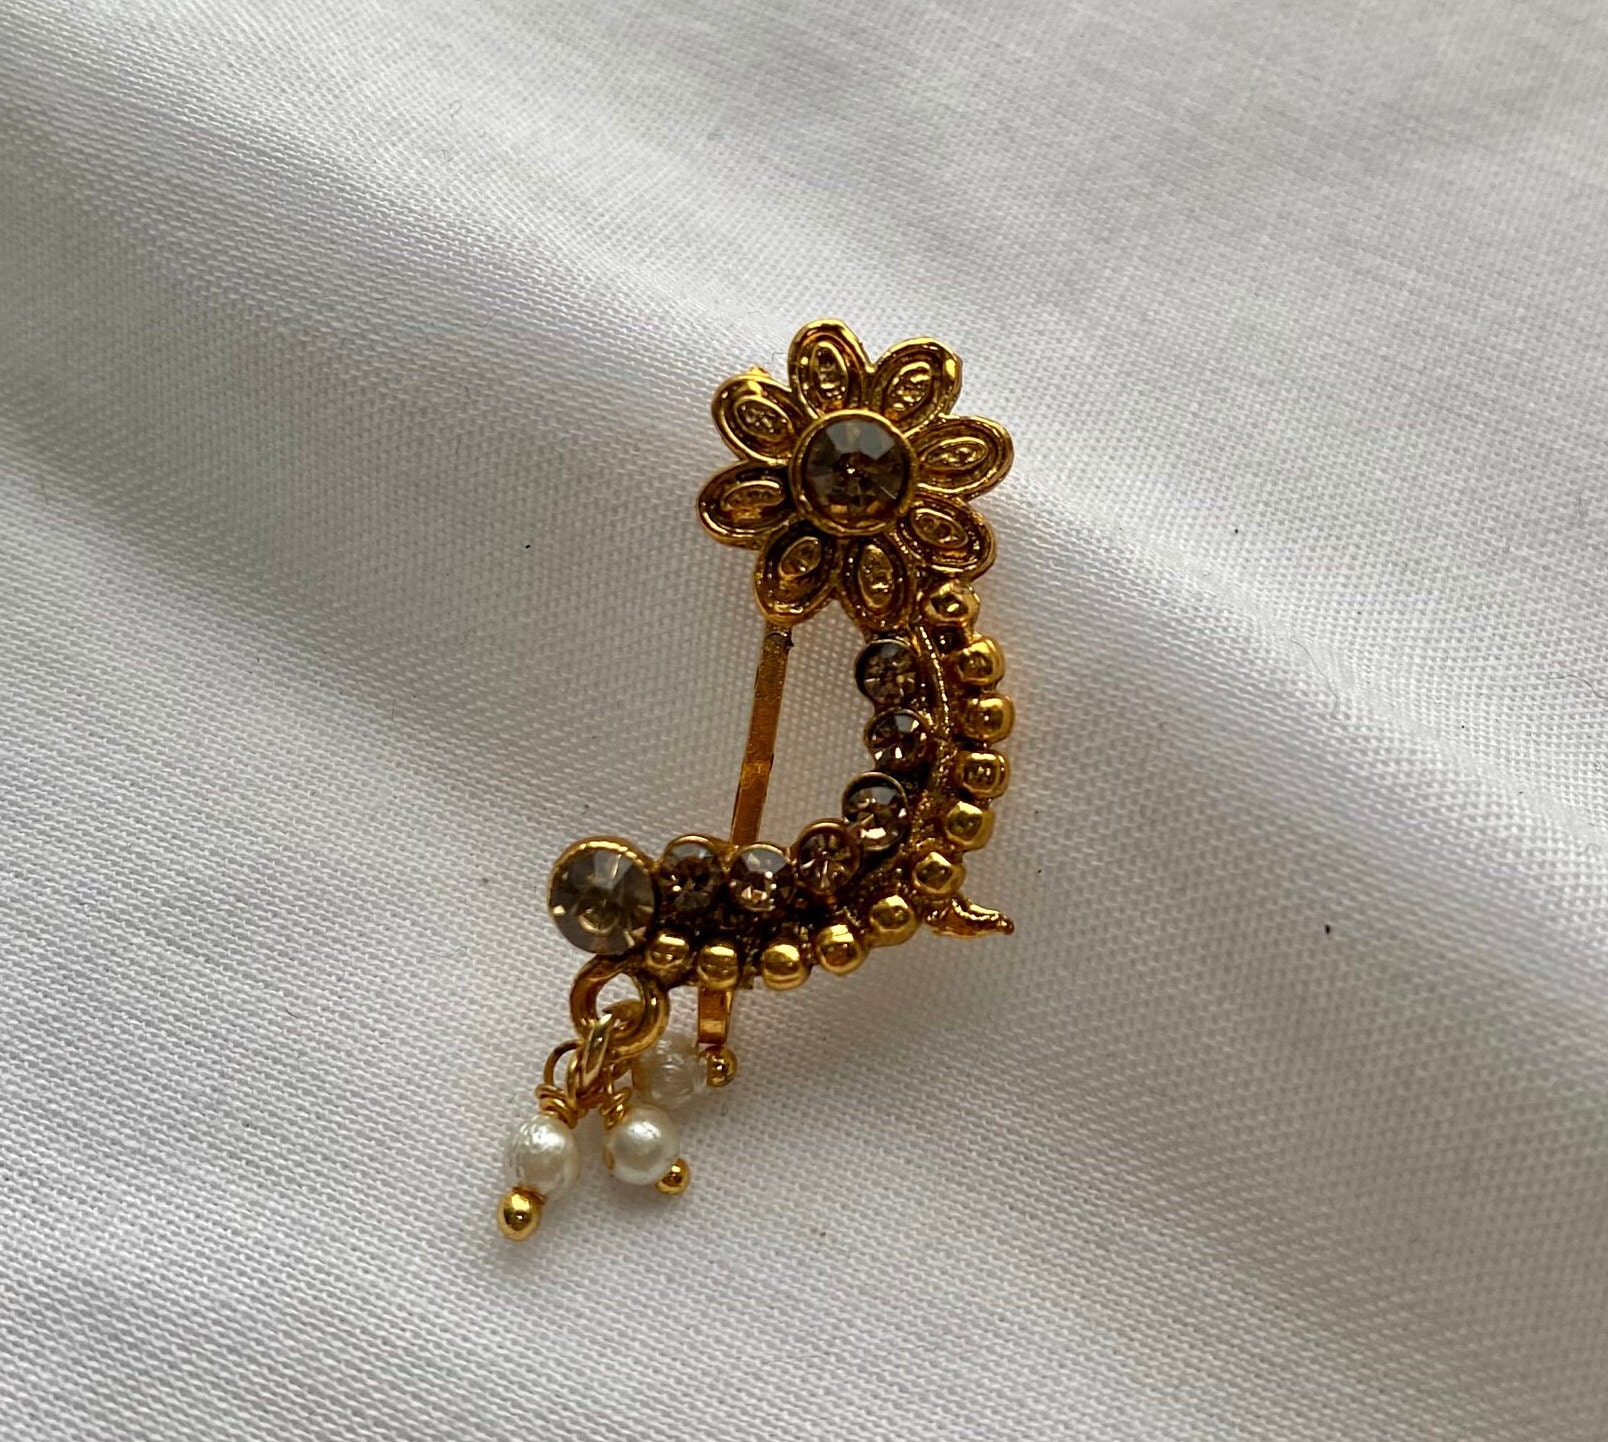 Marathi Nose Stud Indian Nath Jewellery Wedding Nose Ring Gold Plated  Nostril Clip Ethnic Fashion Nose Jewellery None Pierced Nose Ring Hoop -  Etsy India | Nose jewelry, Wedding jewellery designs, Wedding jewelry